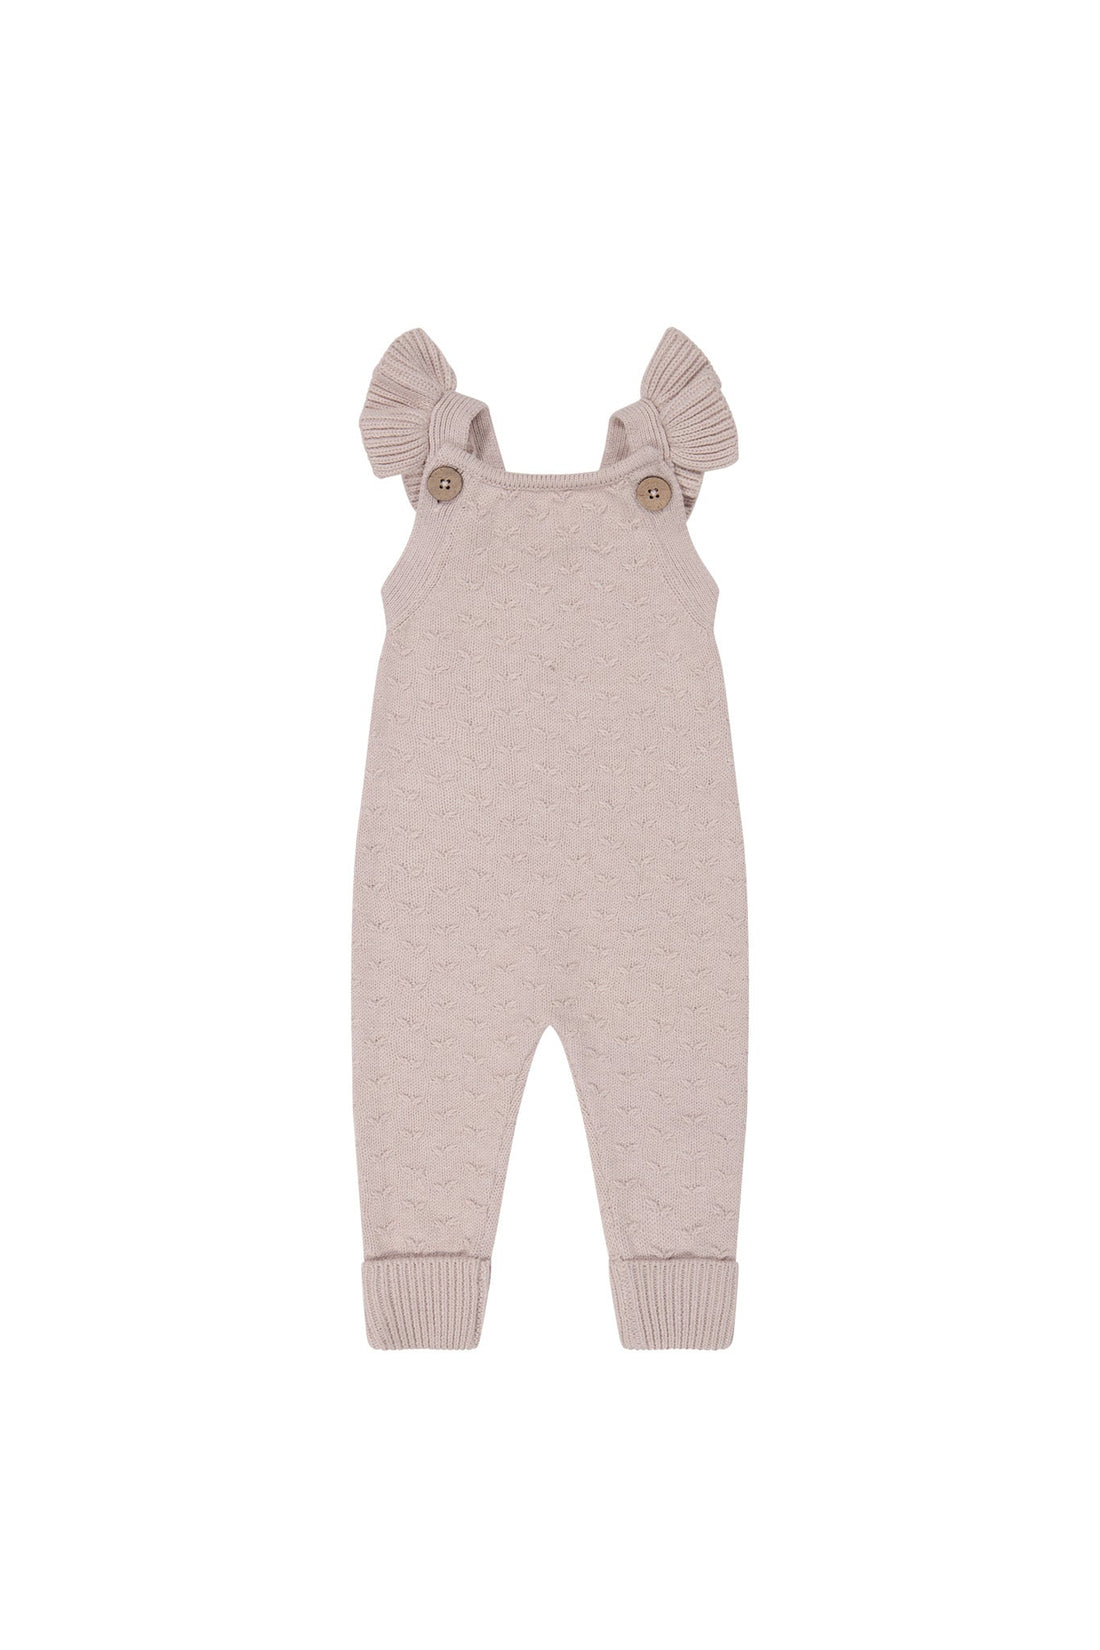 Mia Knitted Onepiece - Ballet Pink Marle Childrens Onepiece from Jamie Kay USA